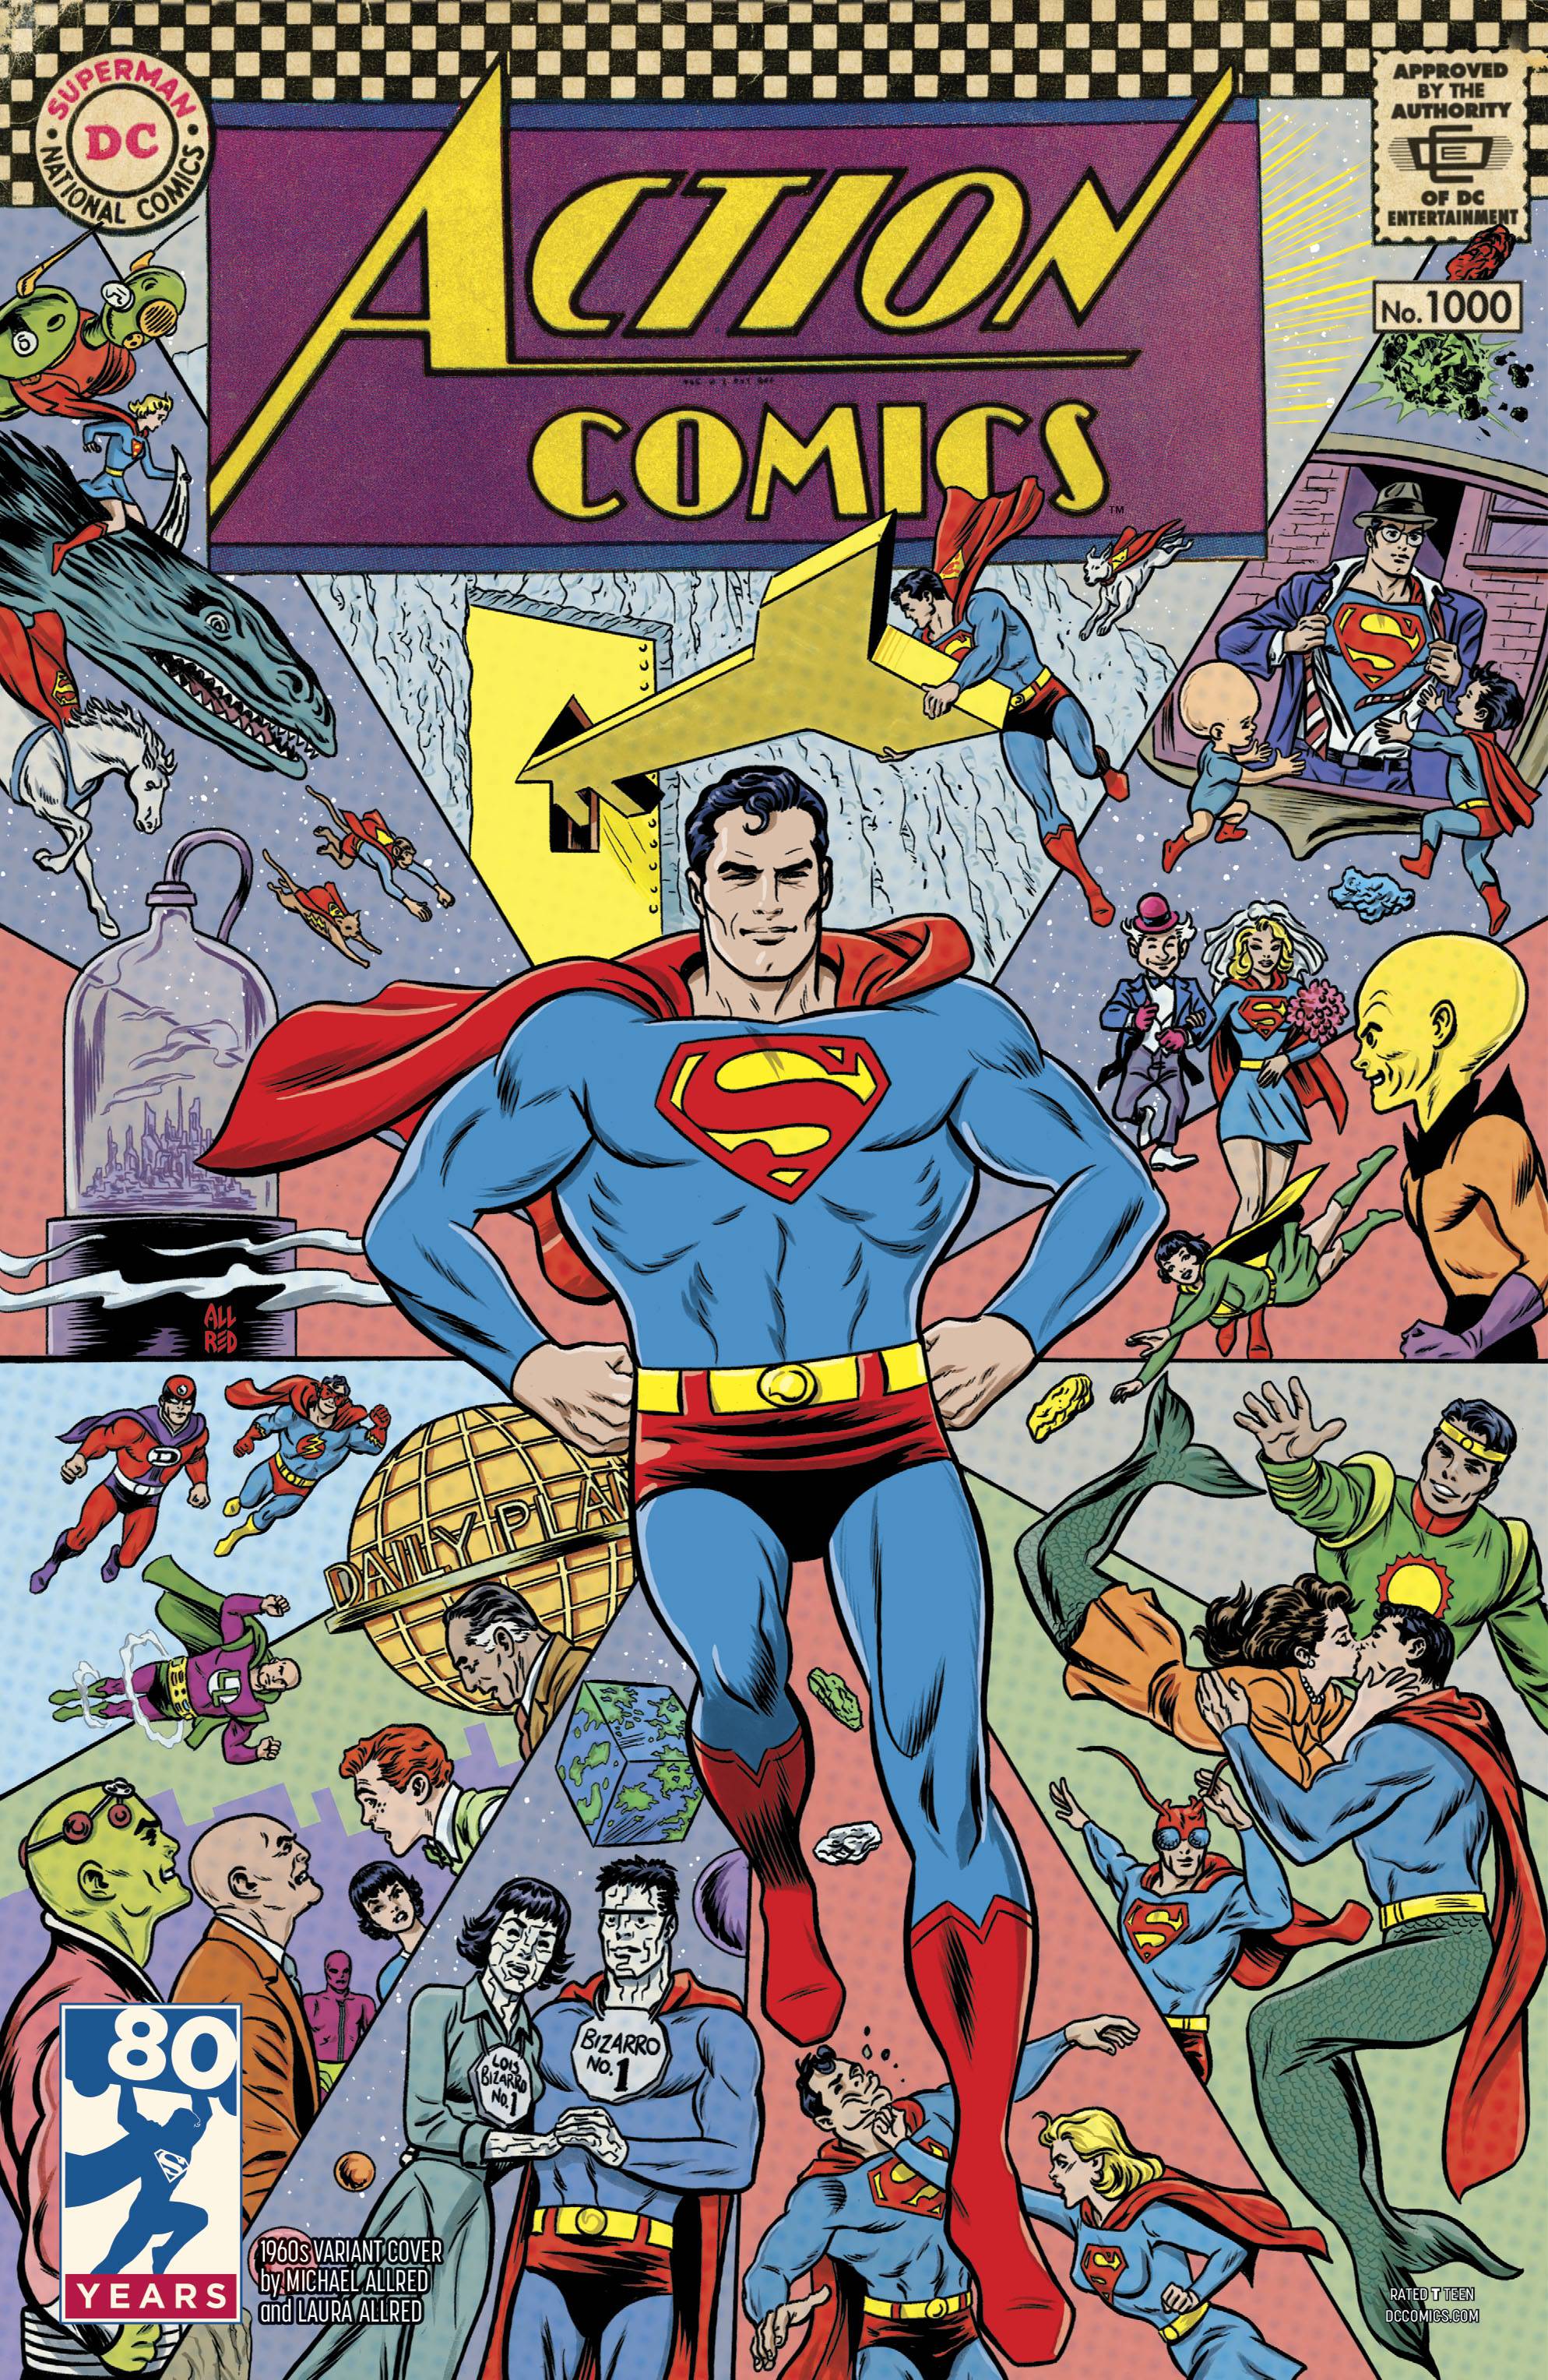 Action Comics #1000 1960s Variant Edition (1938)